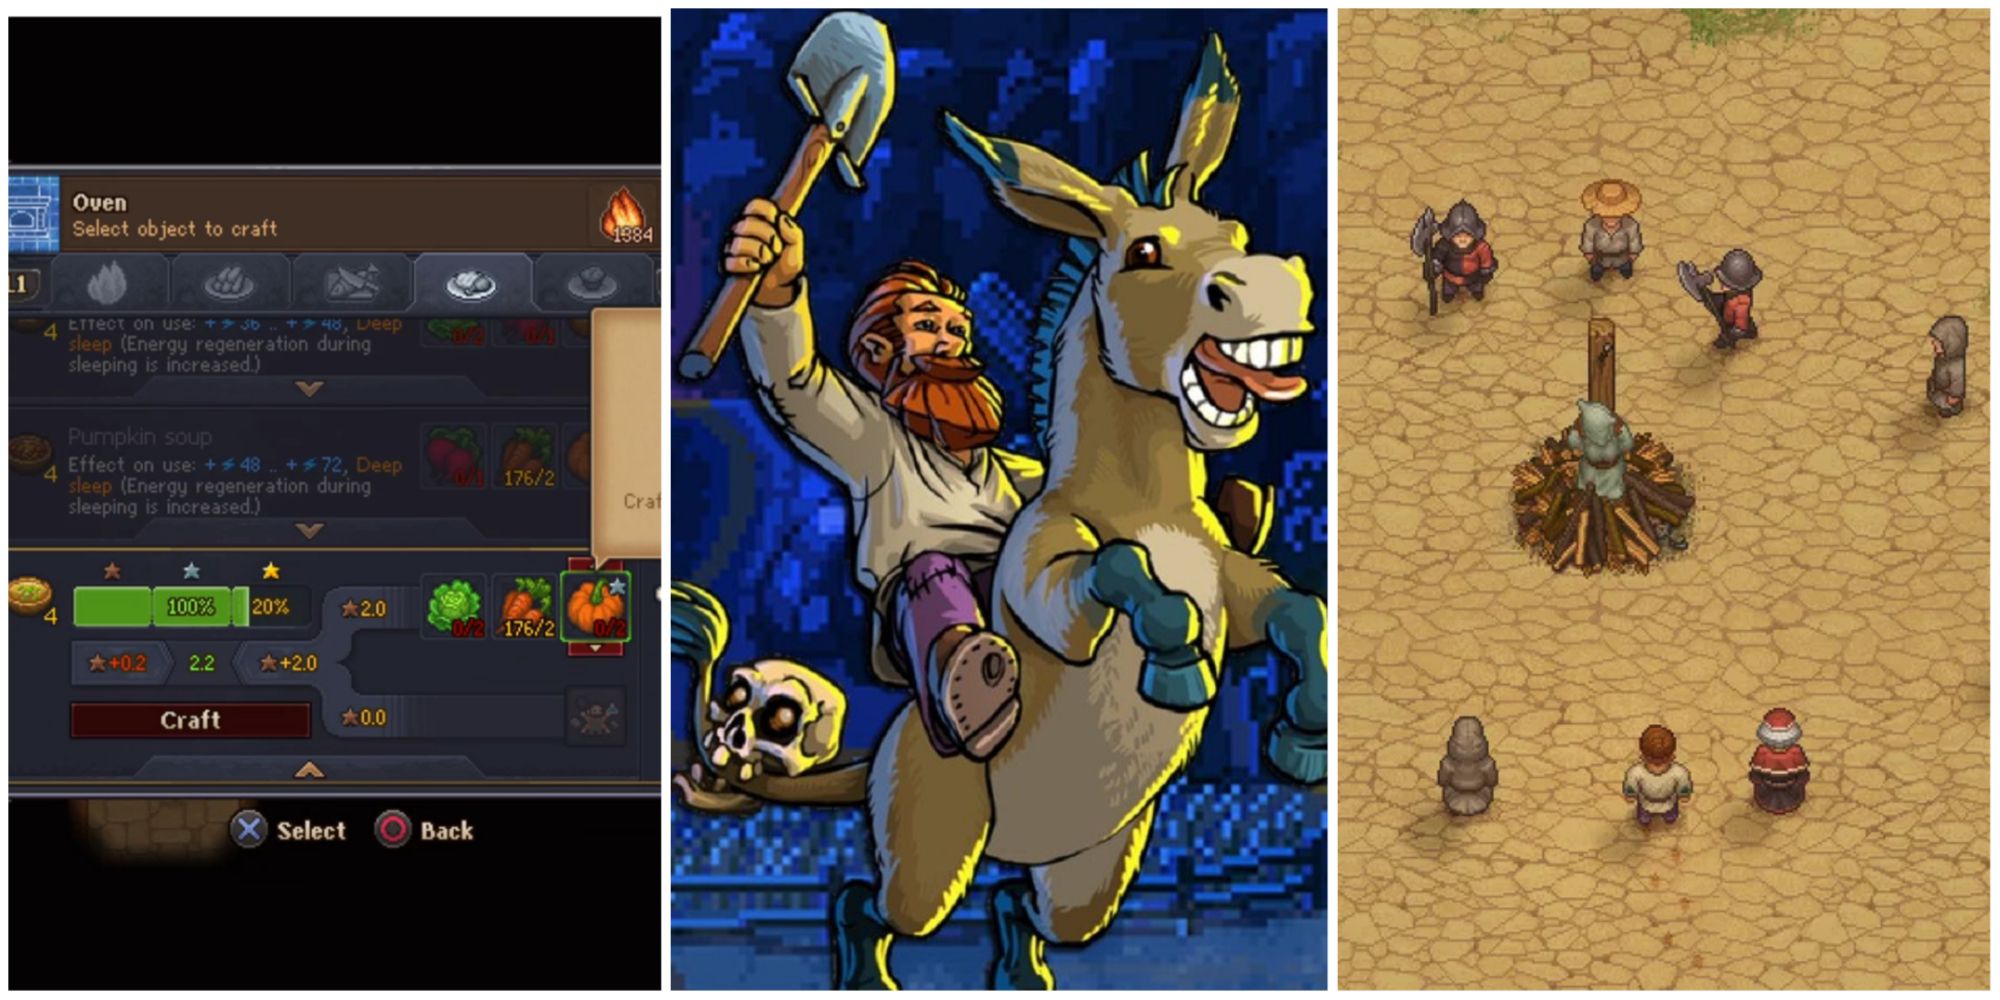 Graveyard Keeper split image with cooking menu, donkey, and witch burning